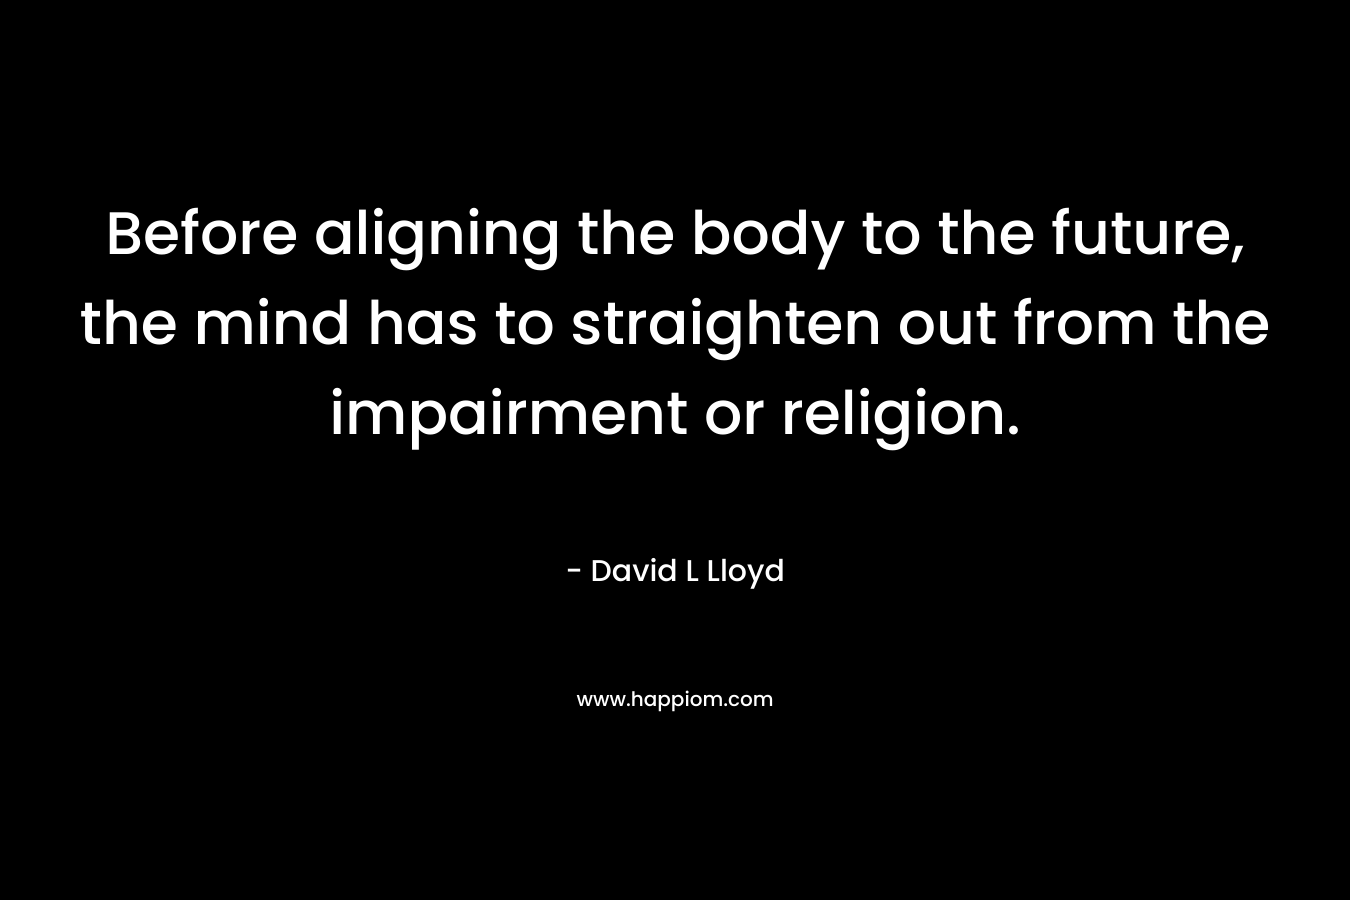 Before aligning the body to the future, the mind has to straighten out from the impairment or religion.